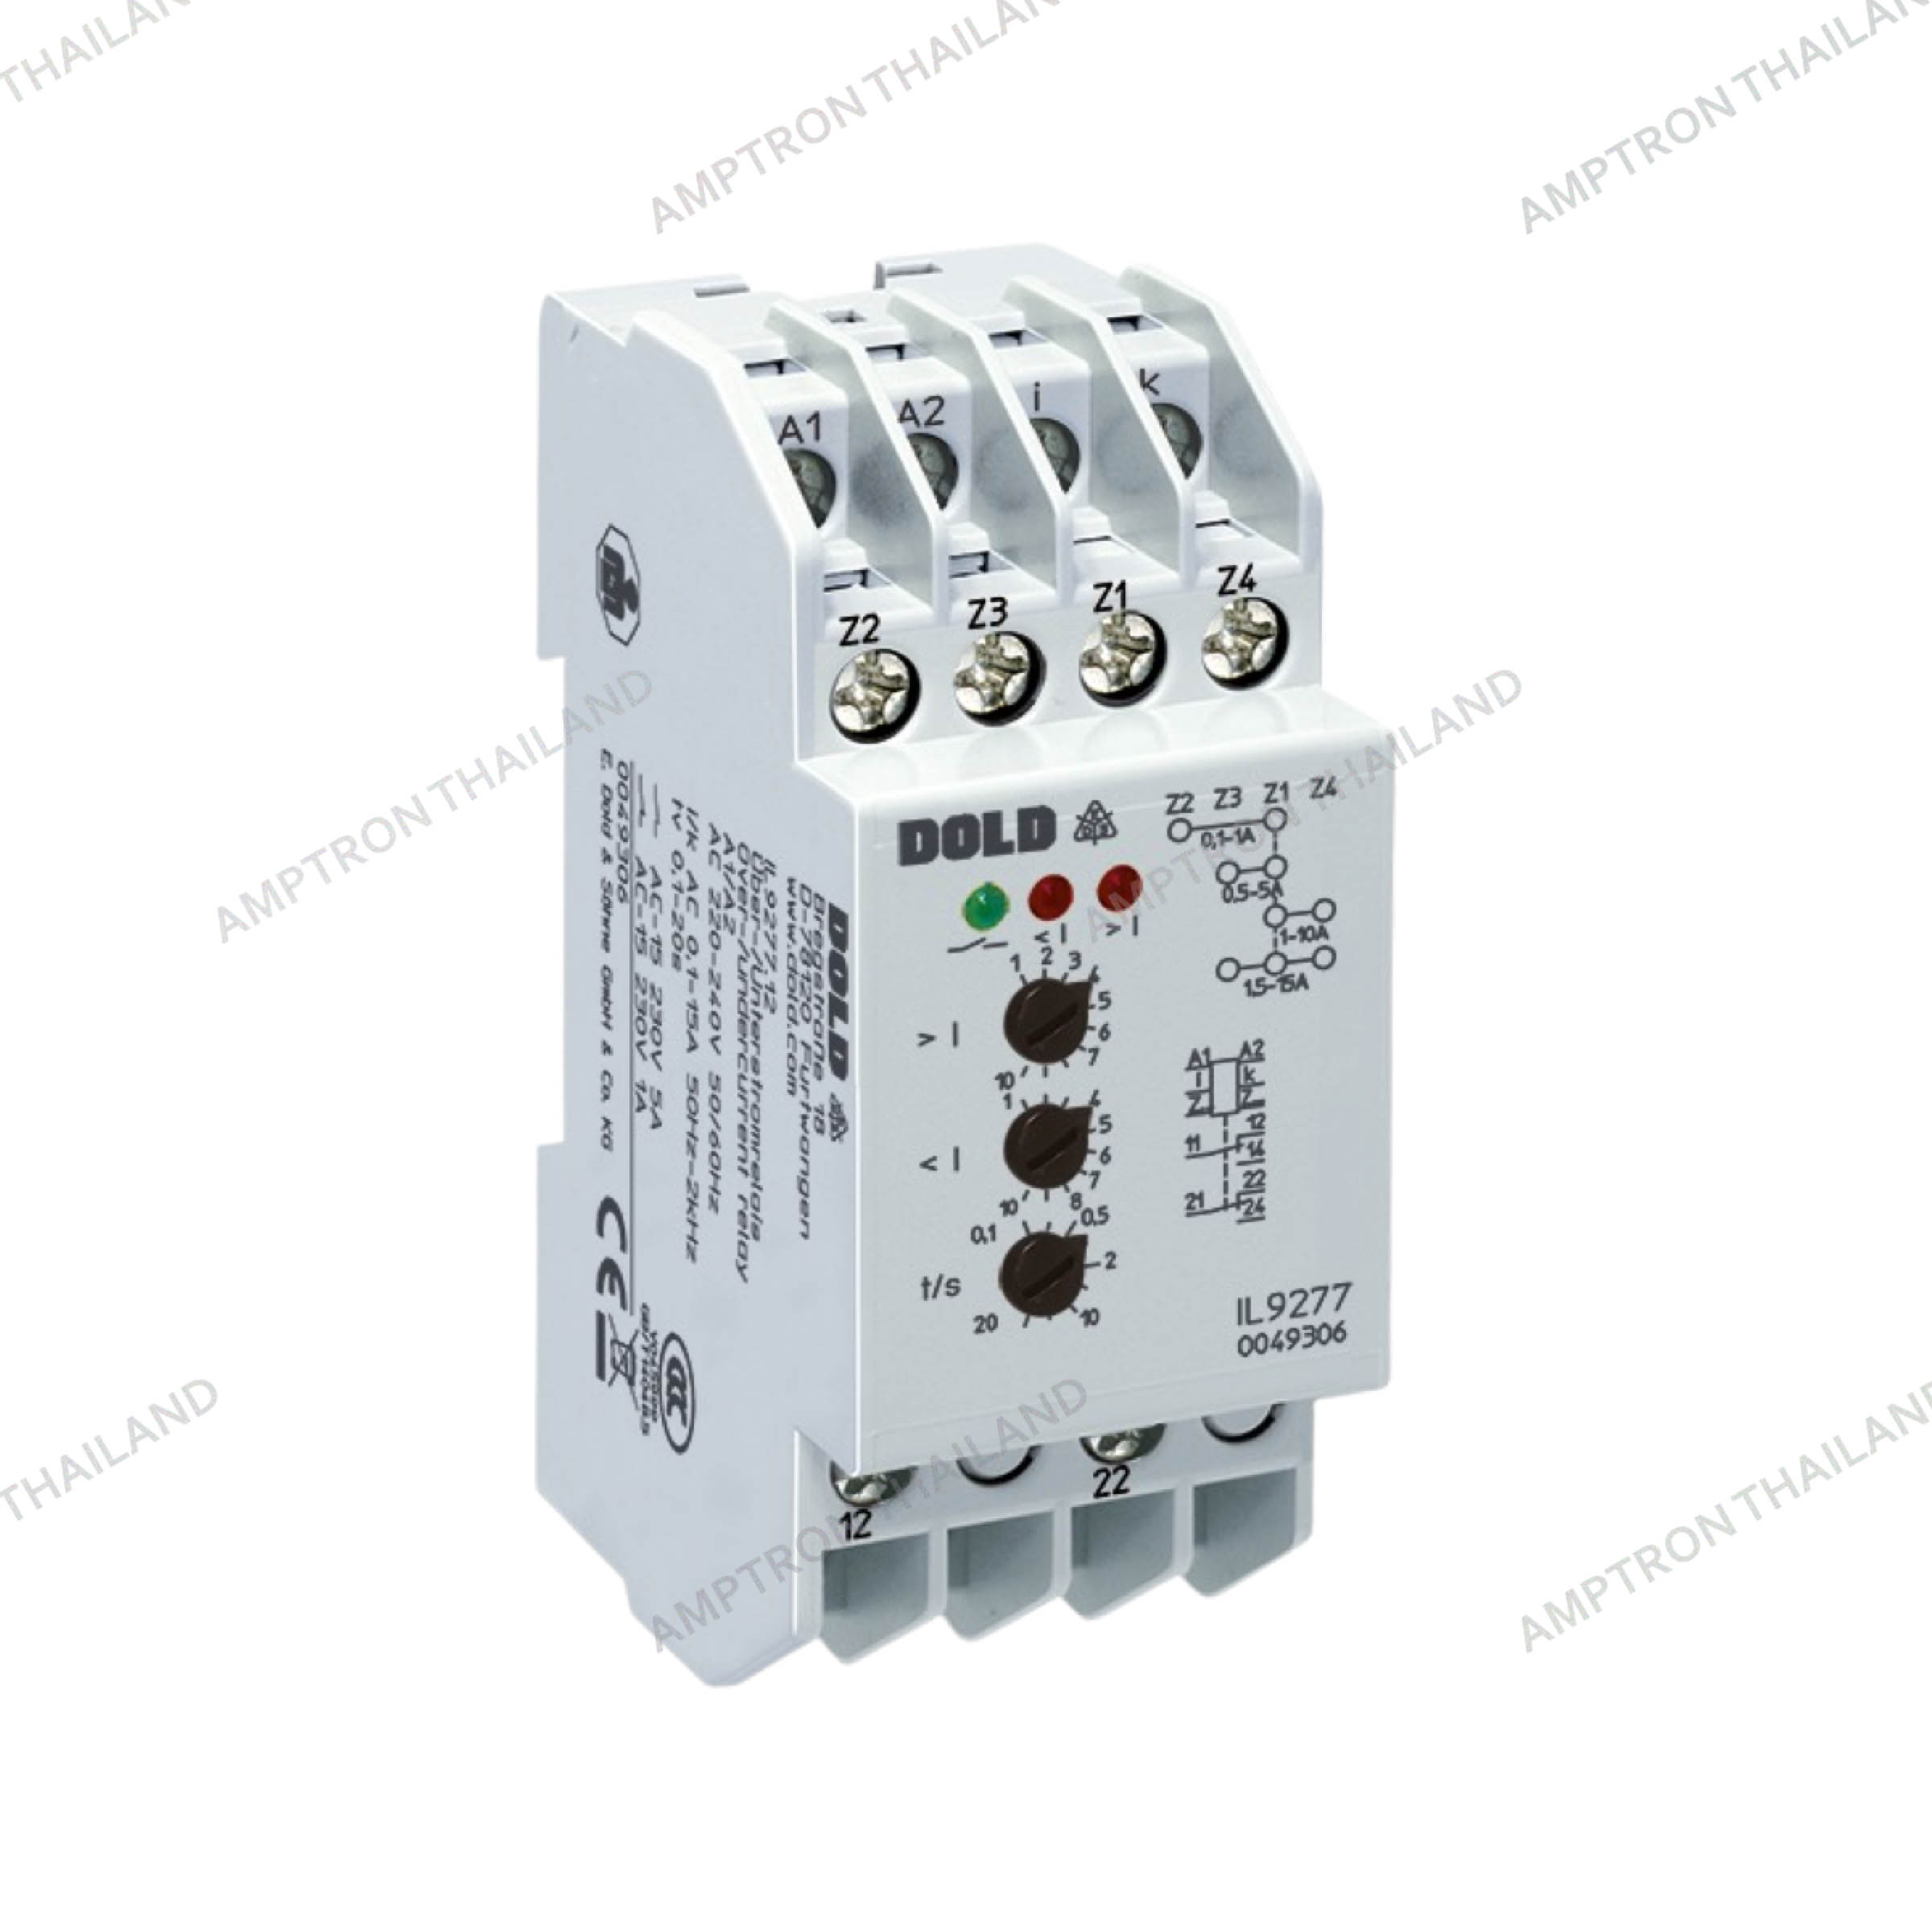 IL 9277 Varimeter Over and Undercurrent Relay